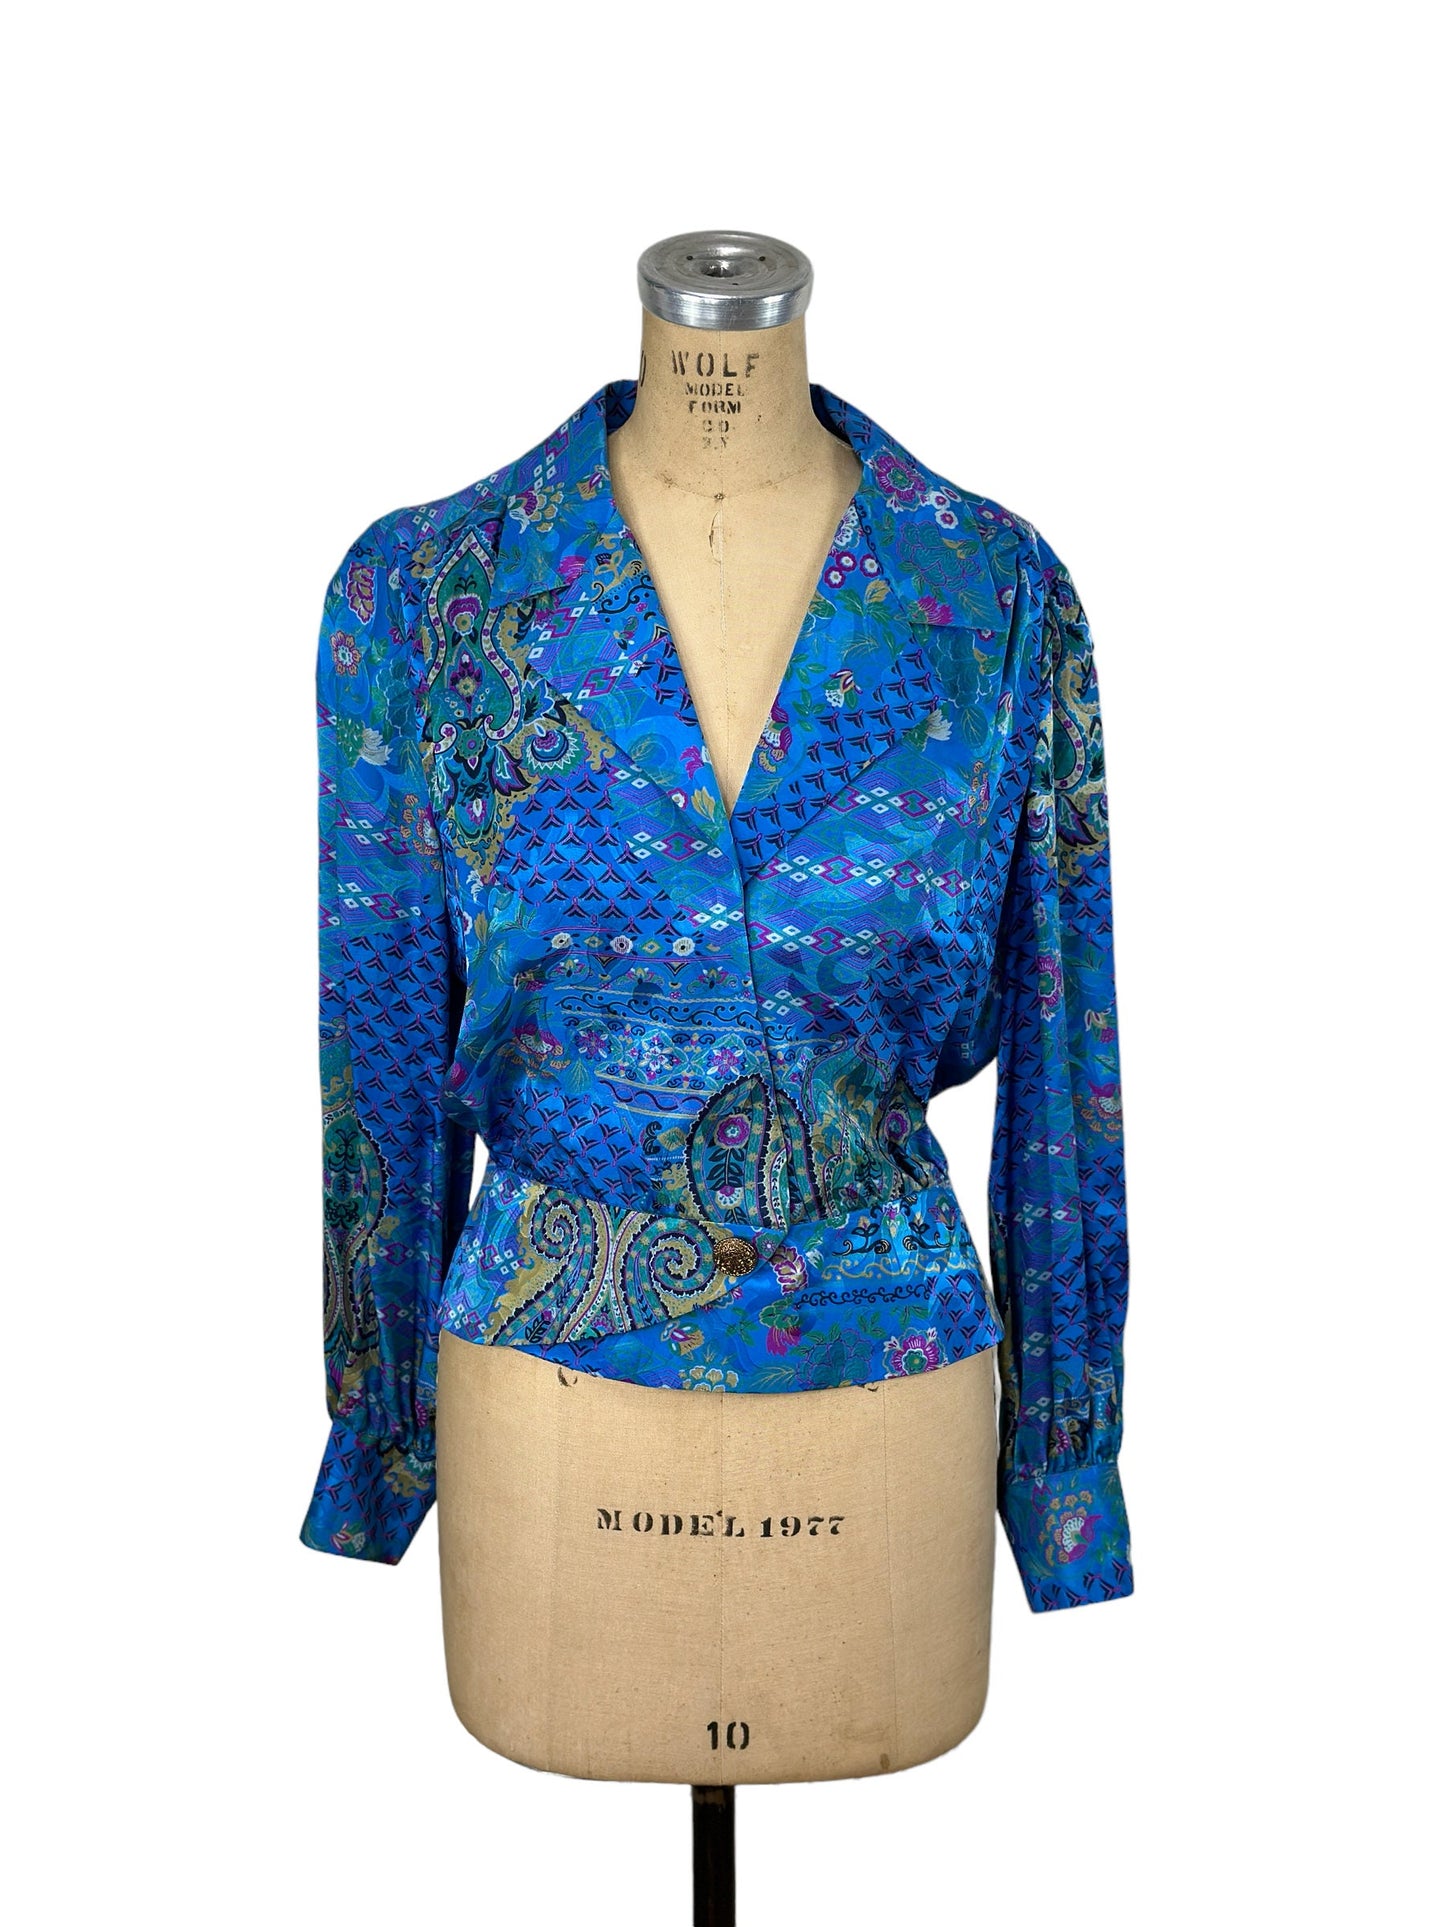 1980s silk blouse with peplum Size 14 by Anne Crimmins for Umi